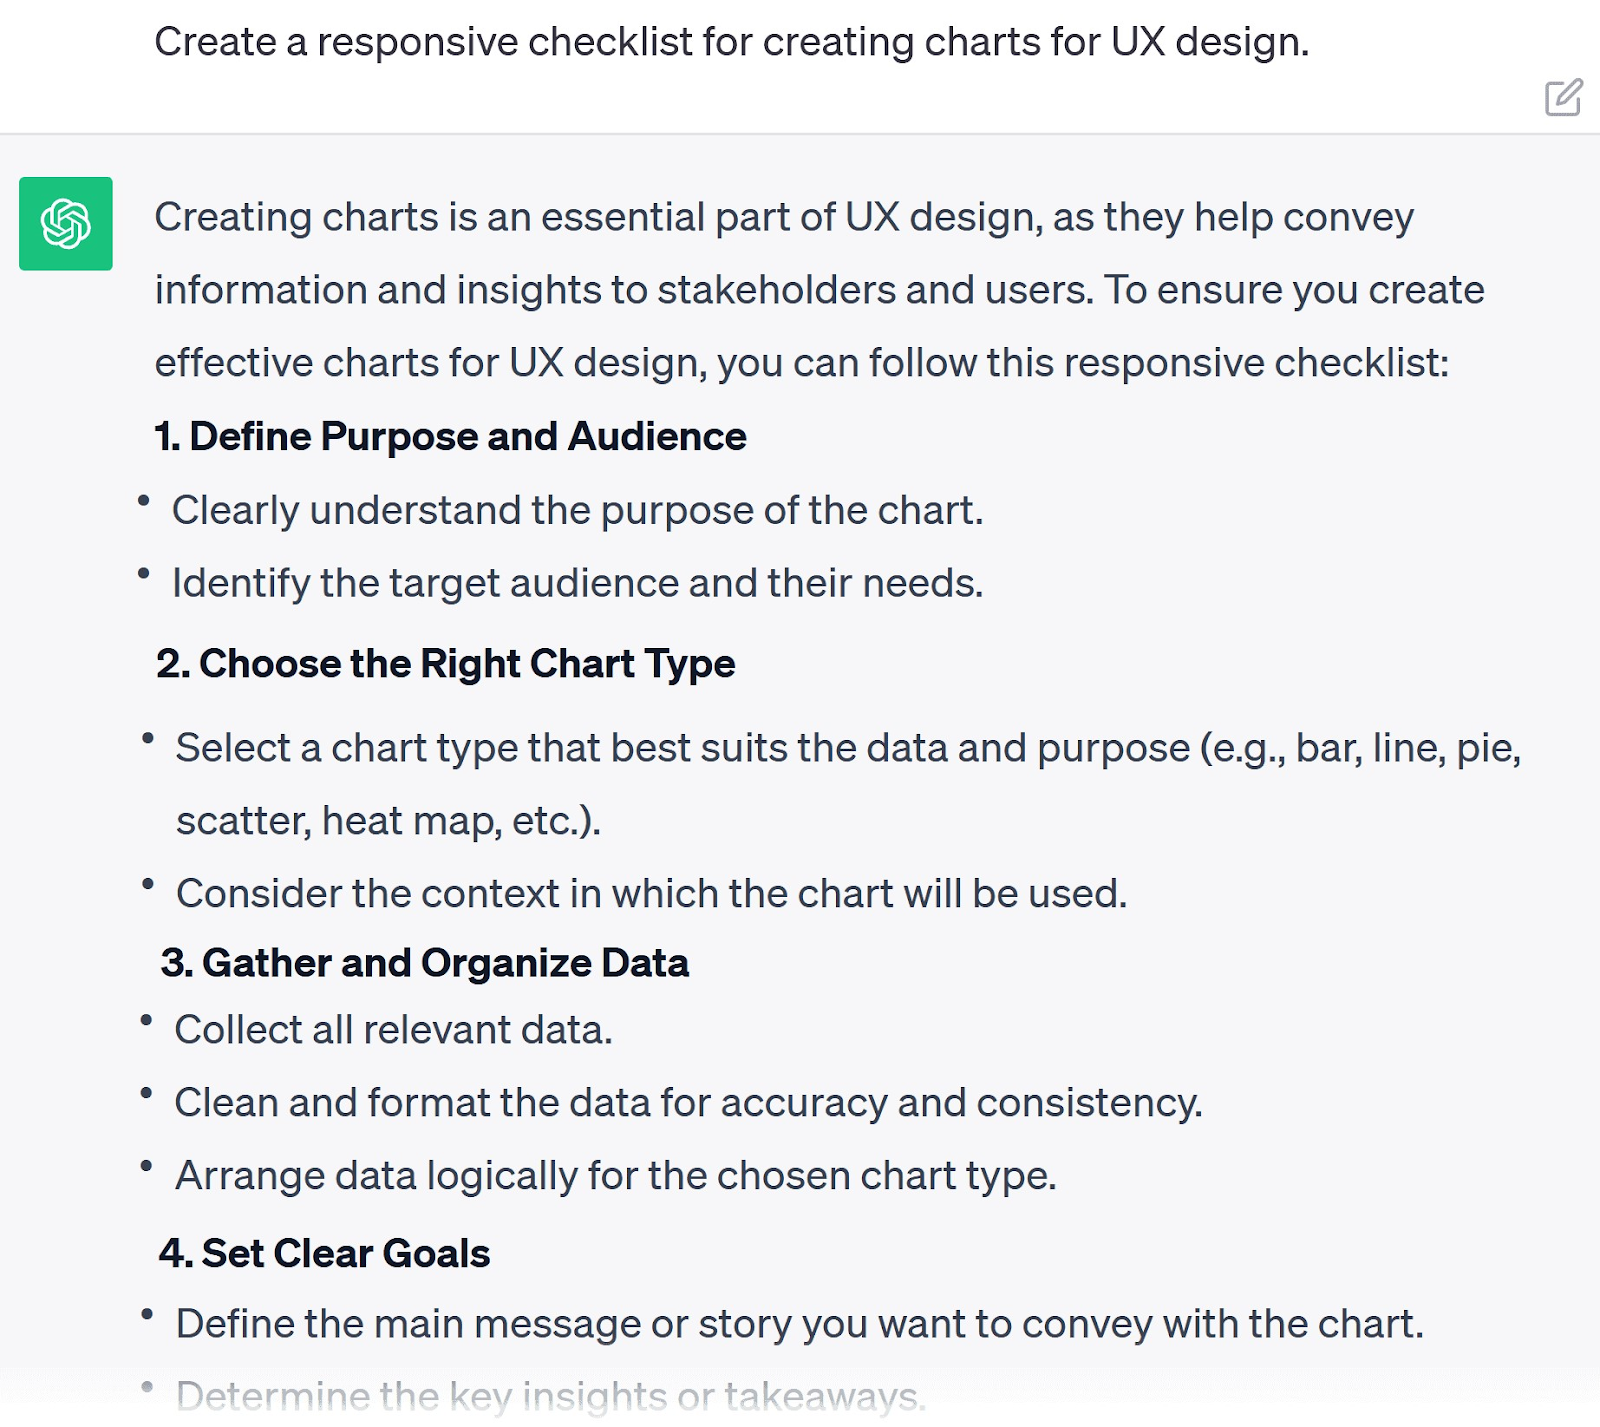 A new prompt asking ChatGPT to create a responsive checklist for creating charts for UX design